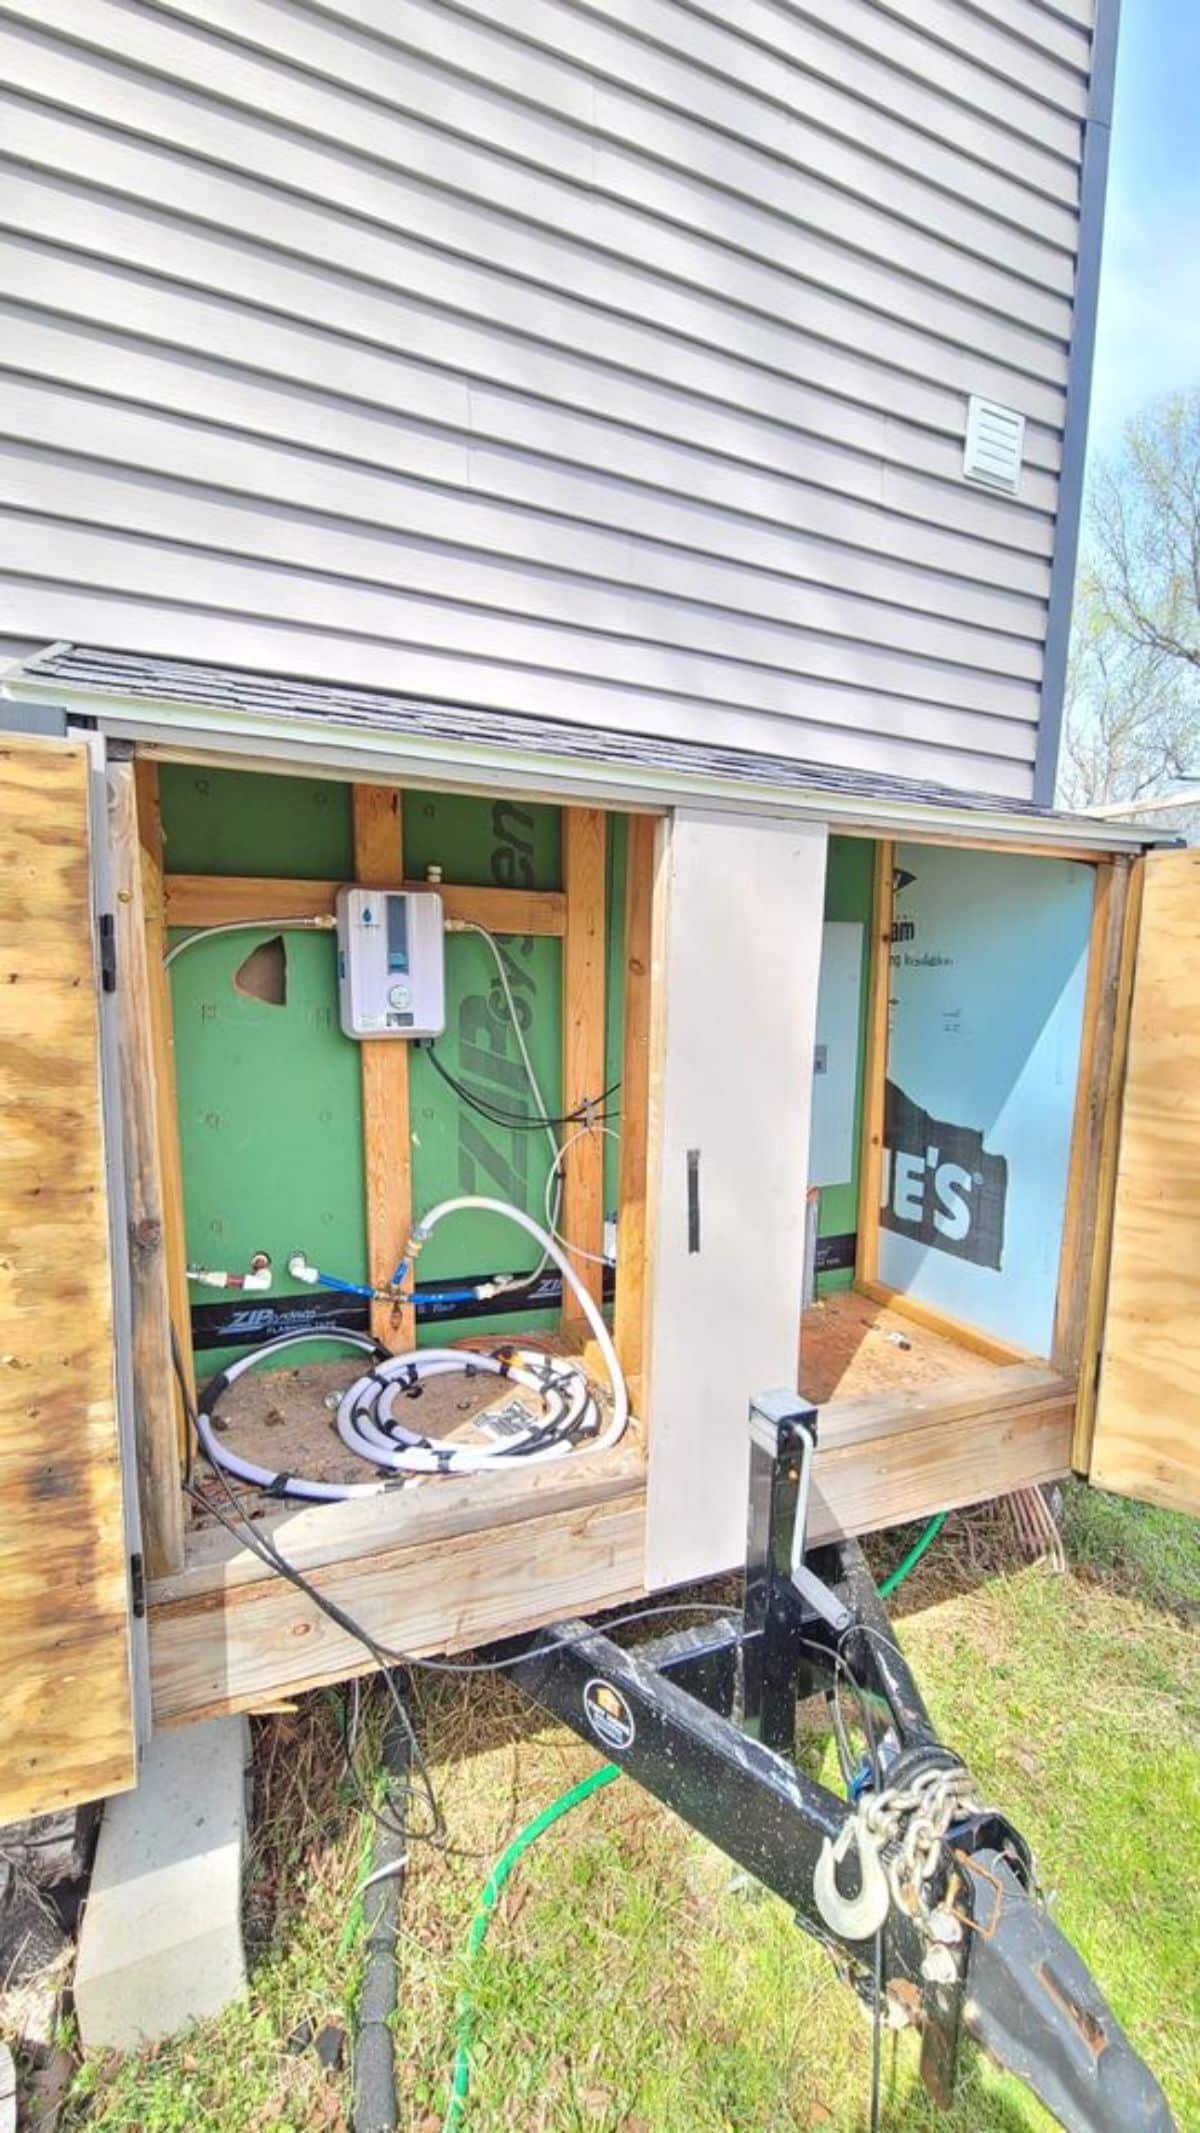 electrical hookups on end of tiny home behind door